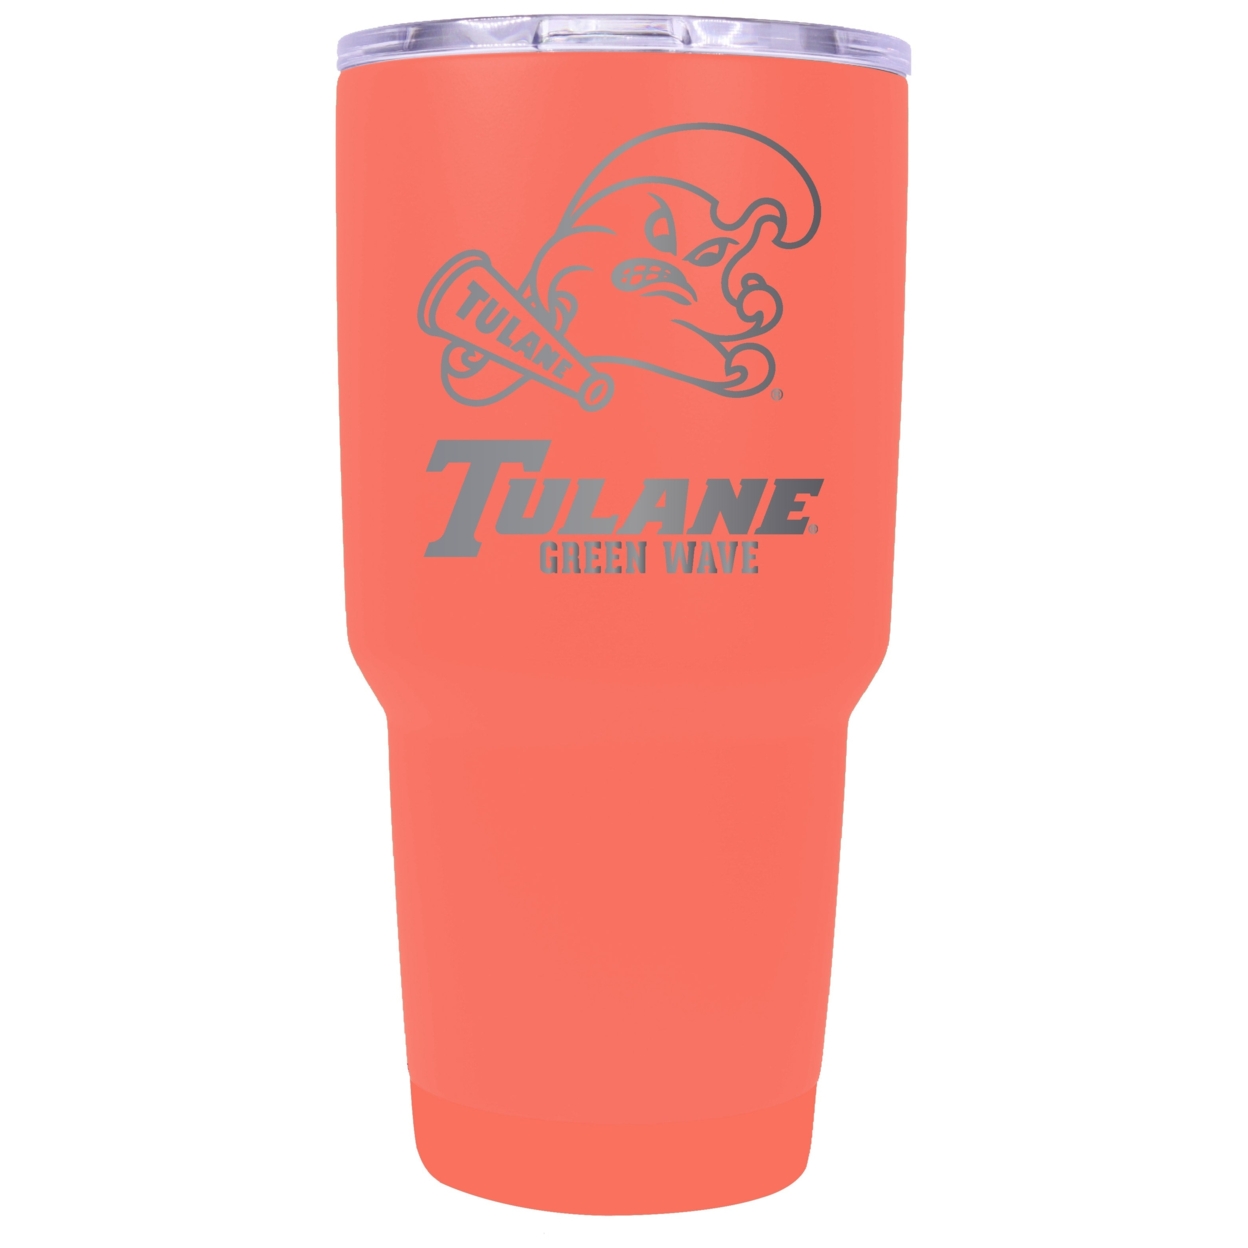 Tulane University Green Wave 24 Oz Laser Engraved Stainless Steel Insulated Tumbler - Choose Your Color. - Coral